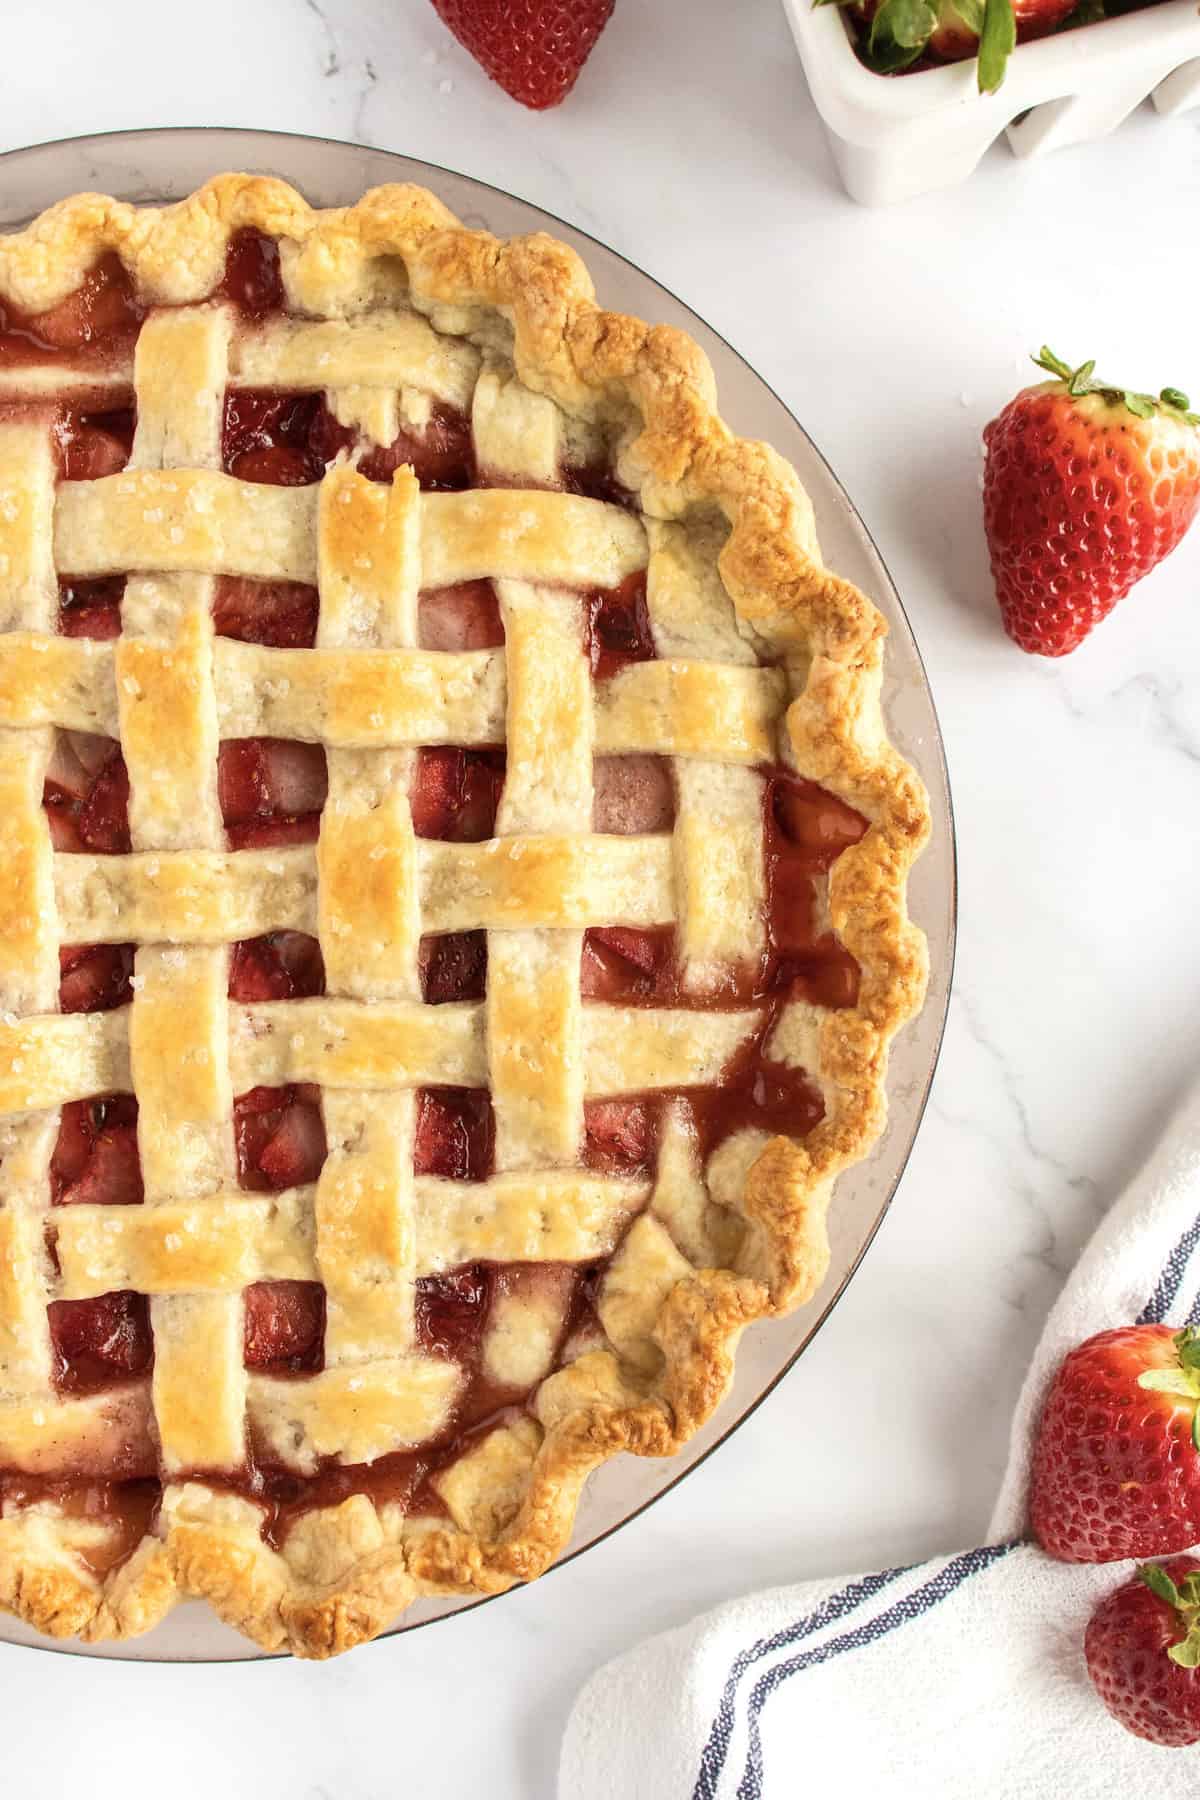 Where Can I Buy a Strawberry Pie? 